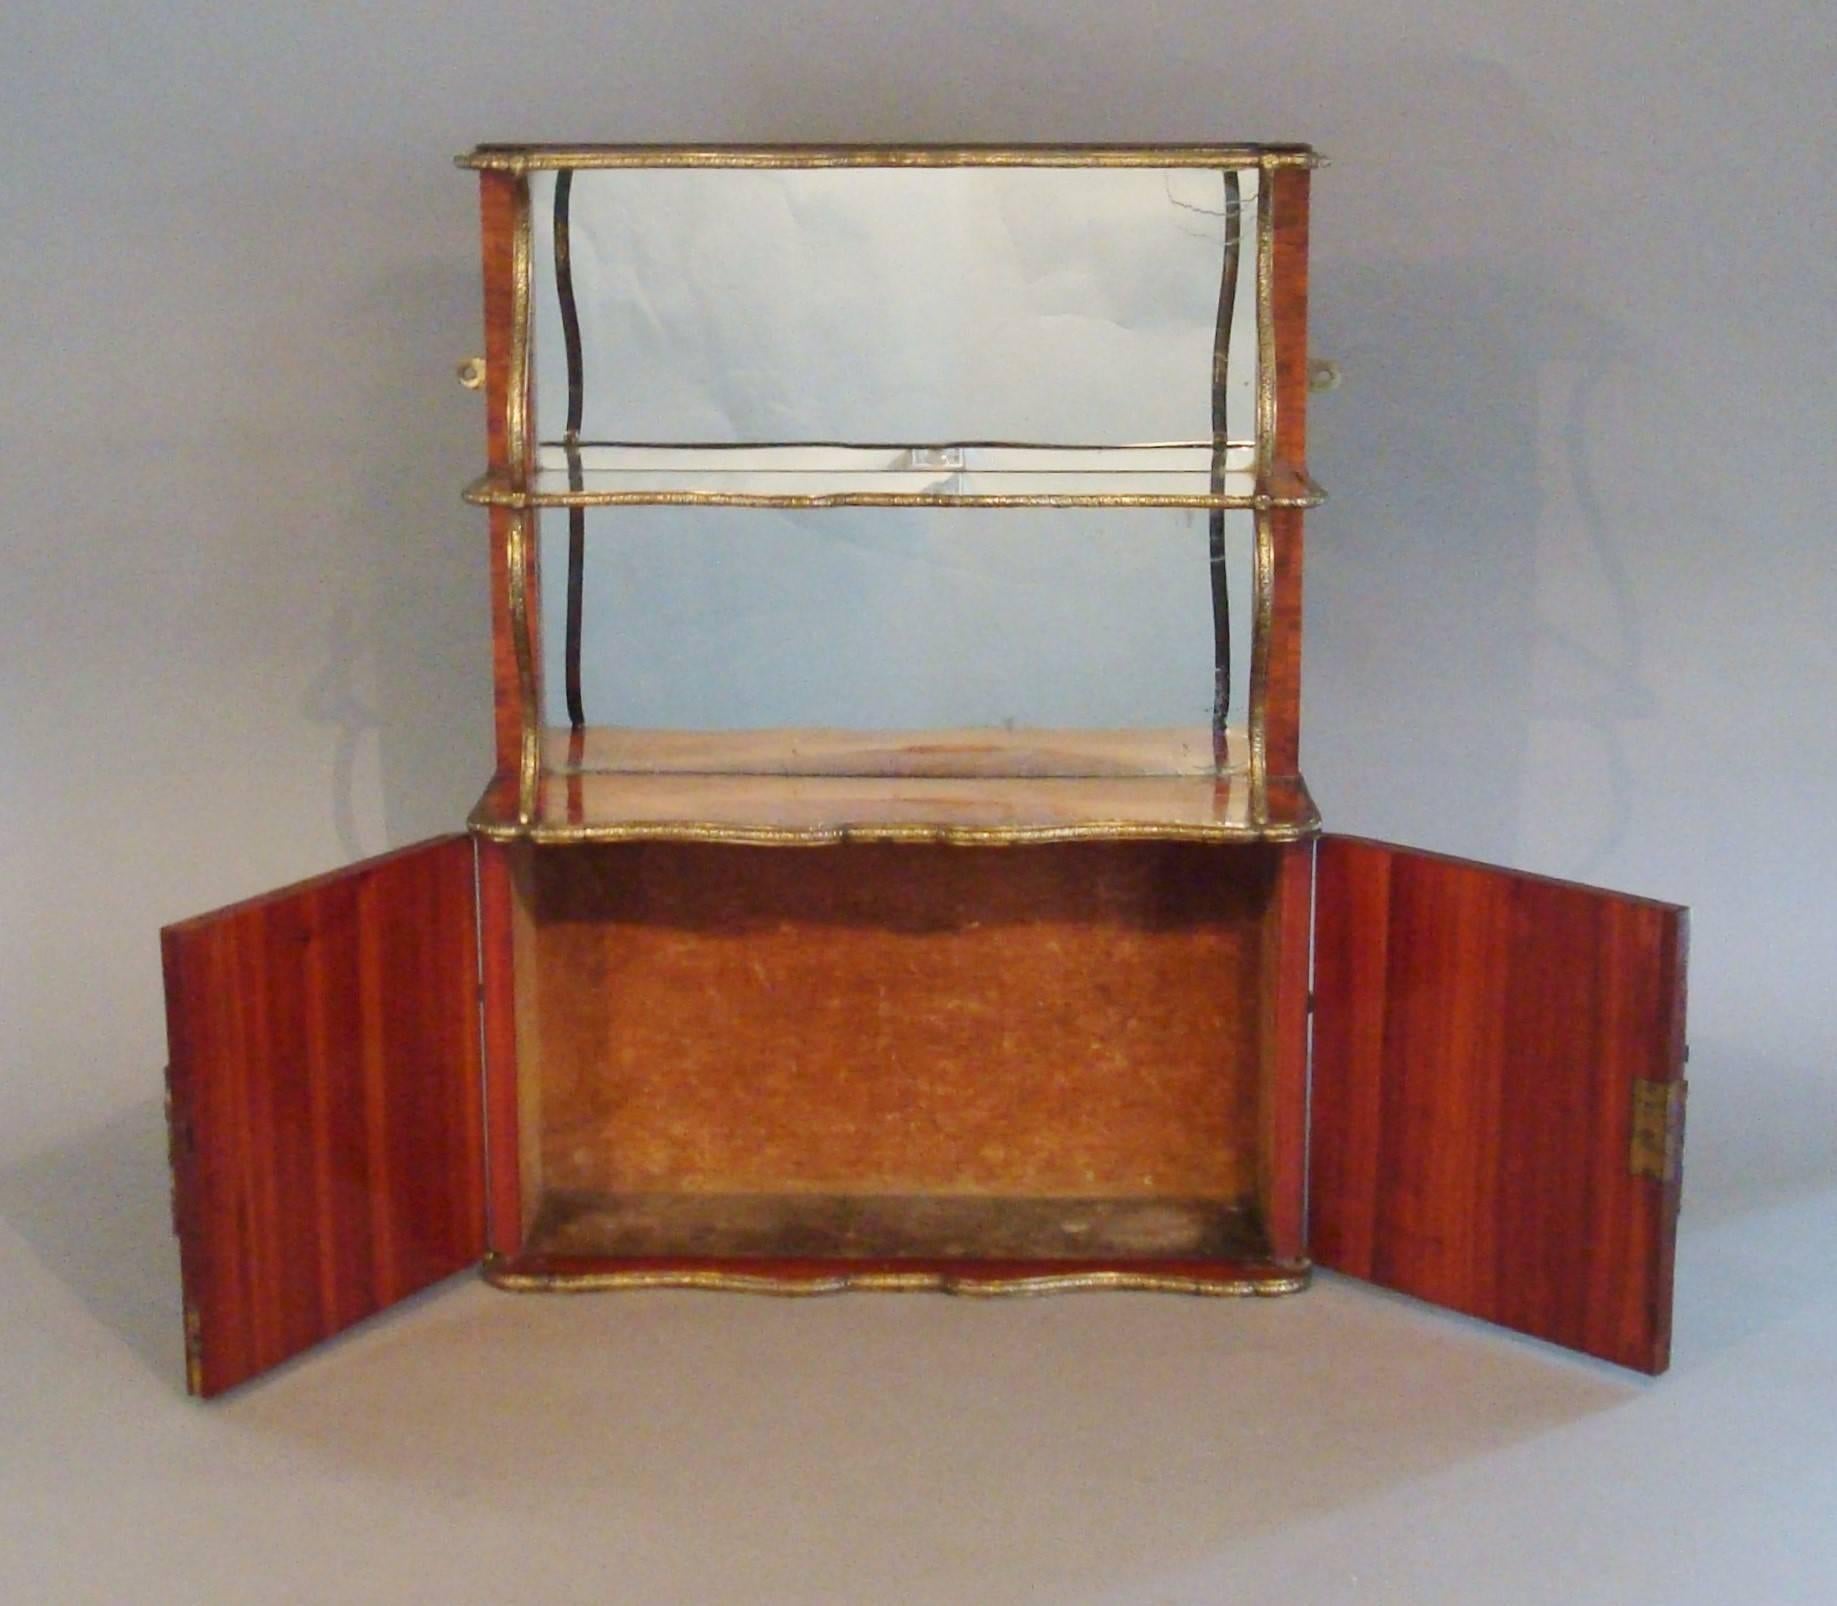 Polished Exceptional 19th Century Pair of English Hanging Wall Cabinets by Town & Emanuel For Sale